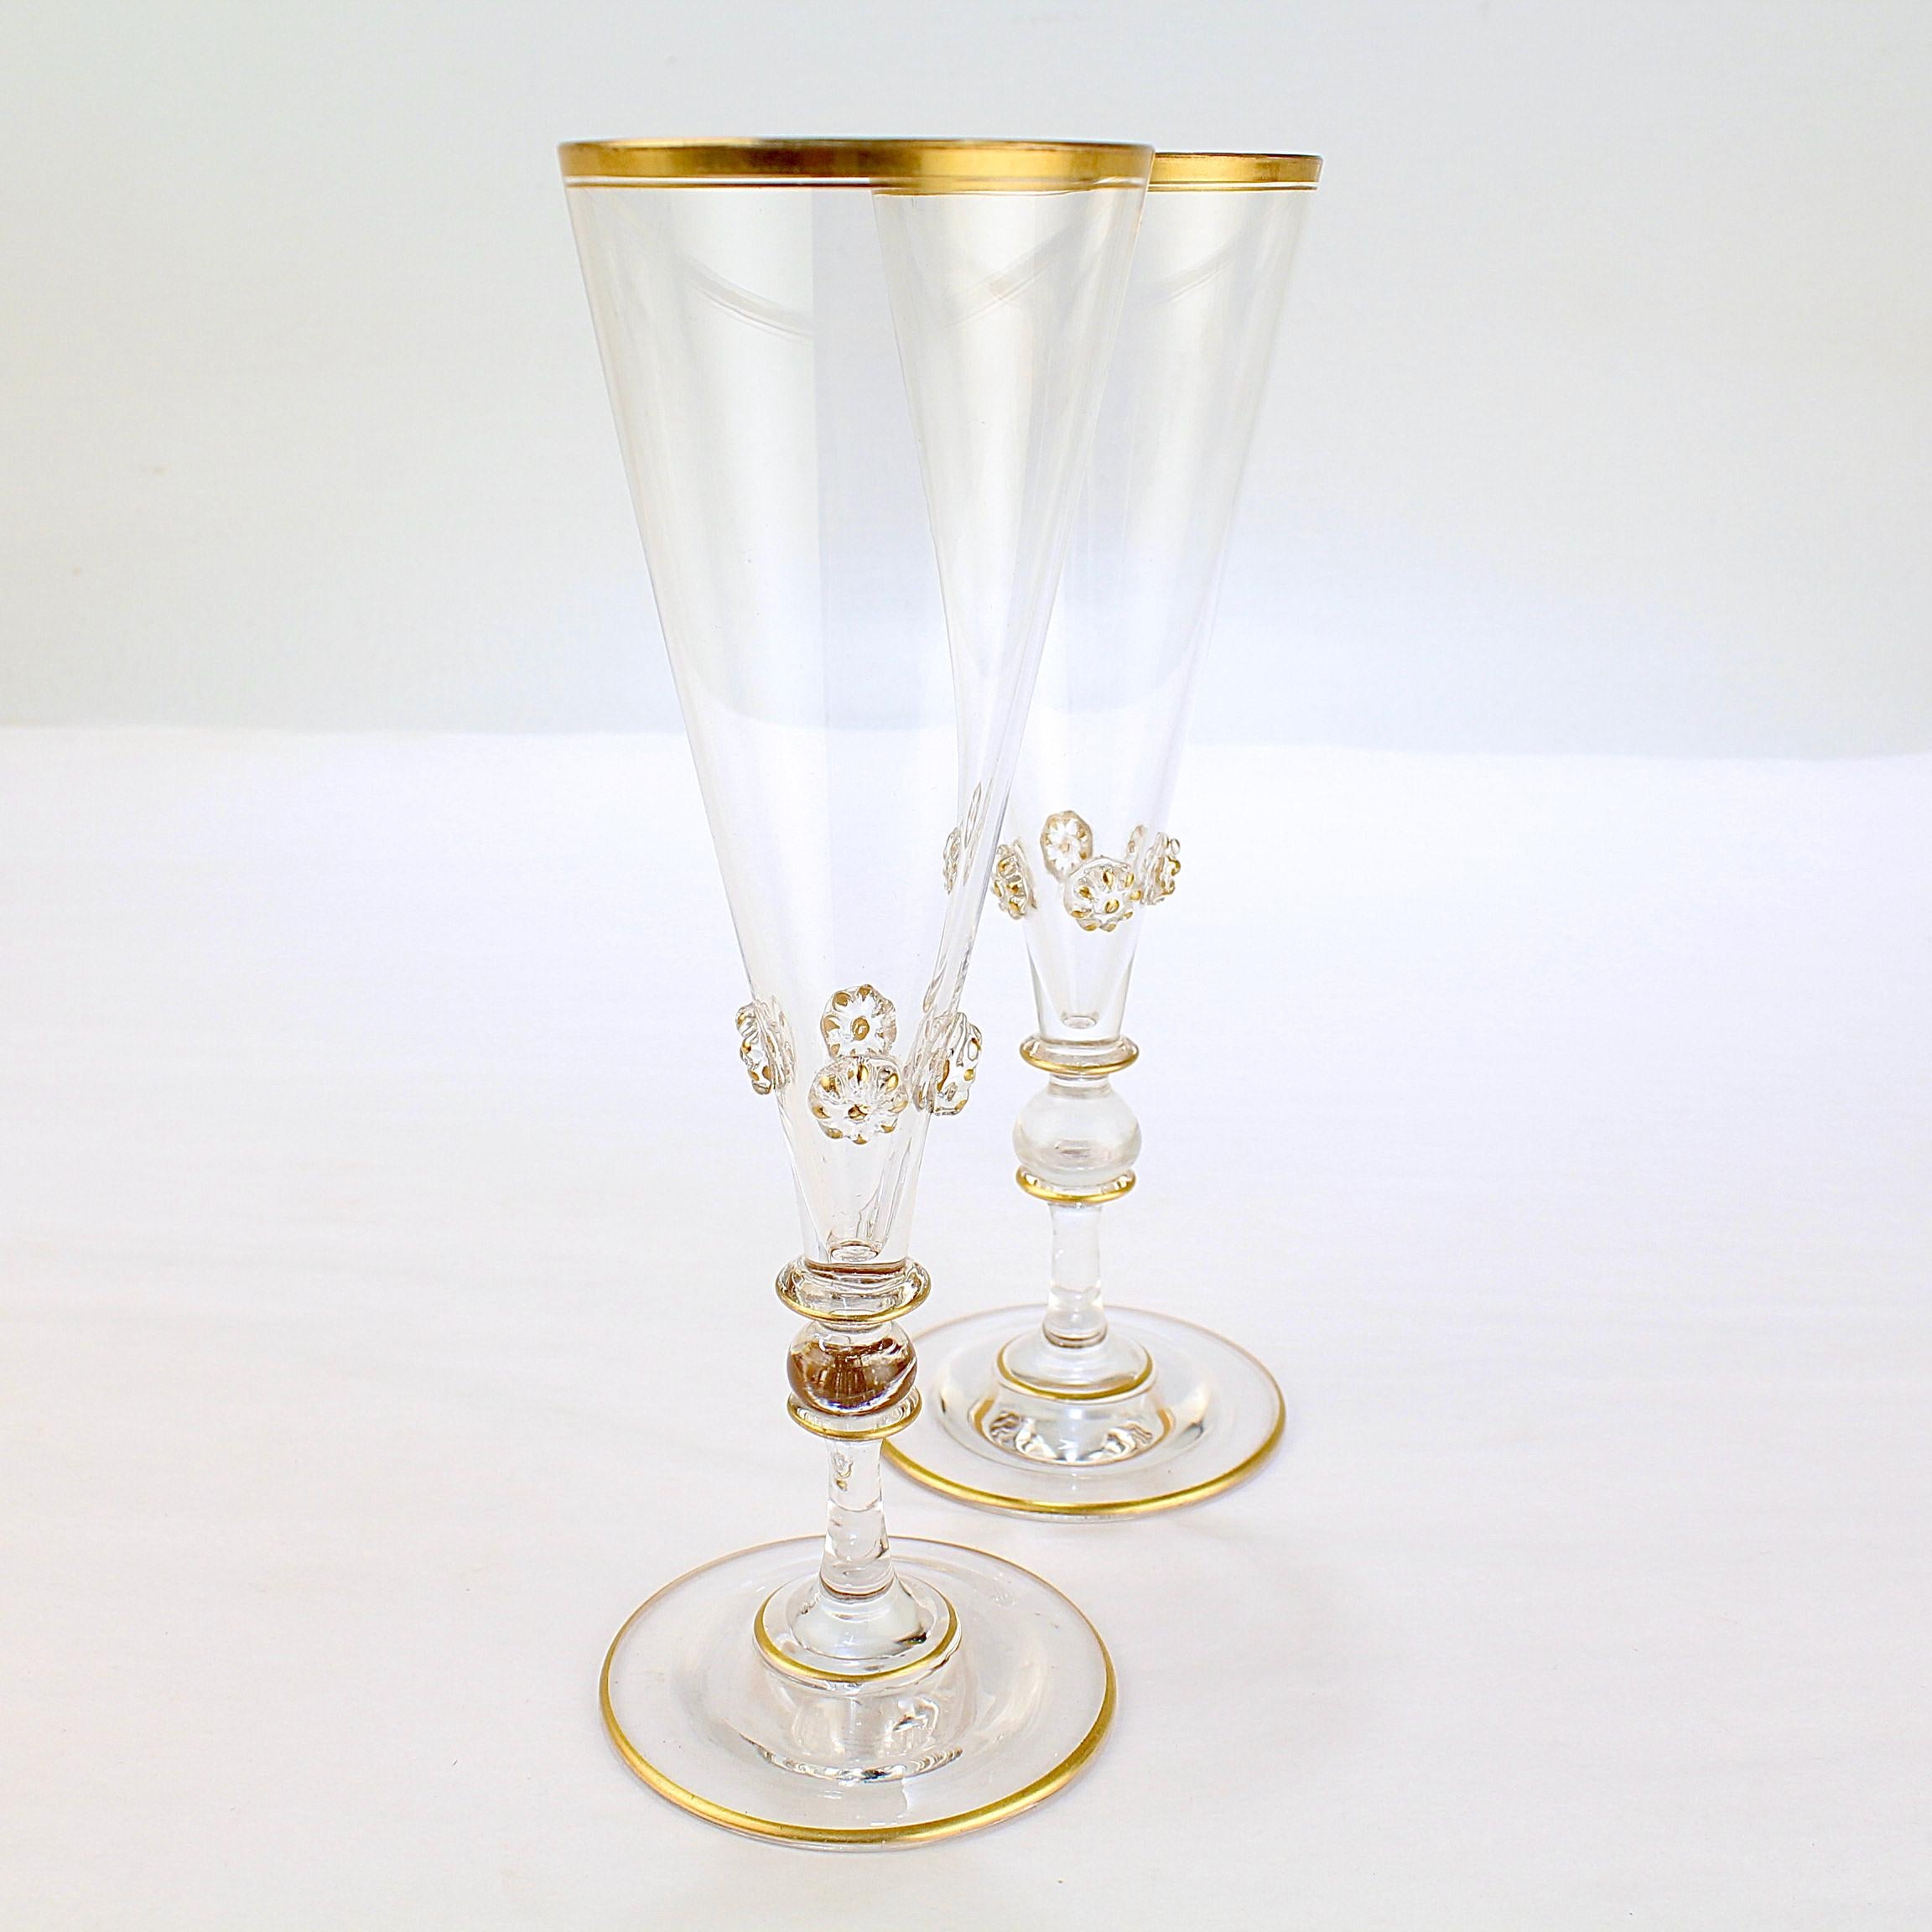 Czech Pair of Old or Antique Bohemian Glass Champagne Flutes with Applied Knops